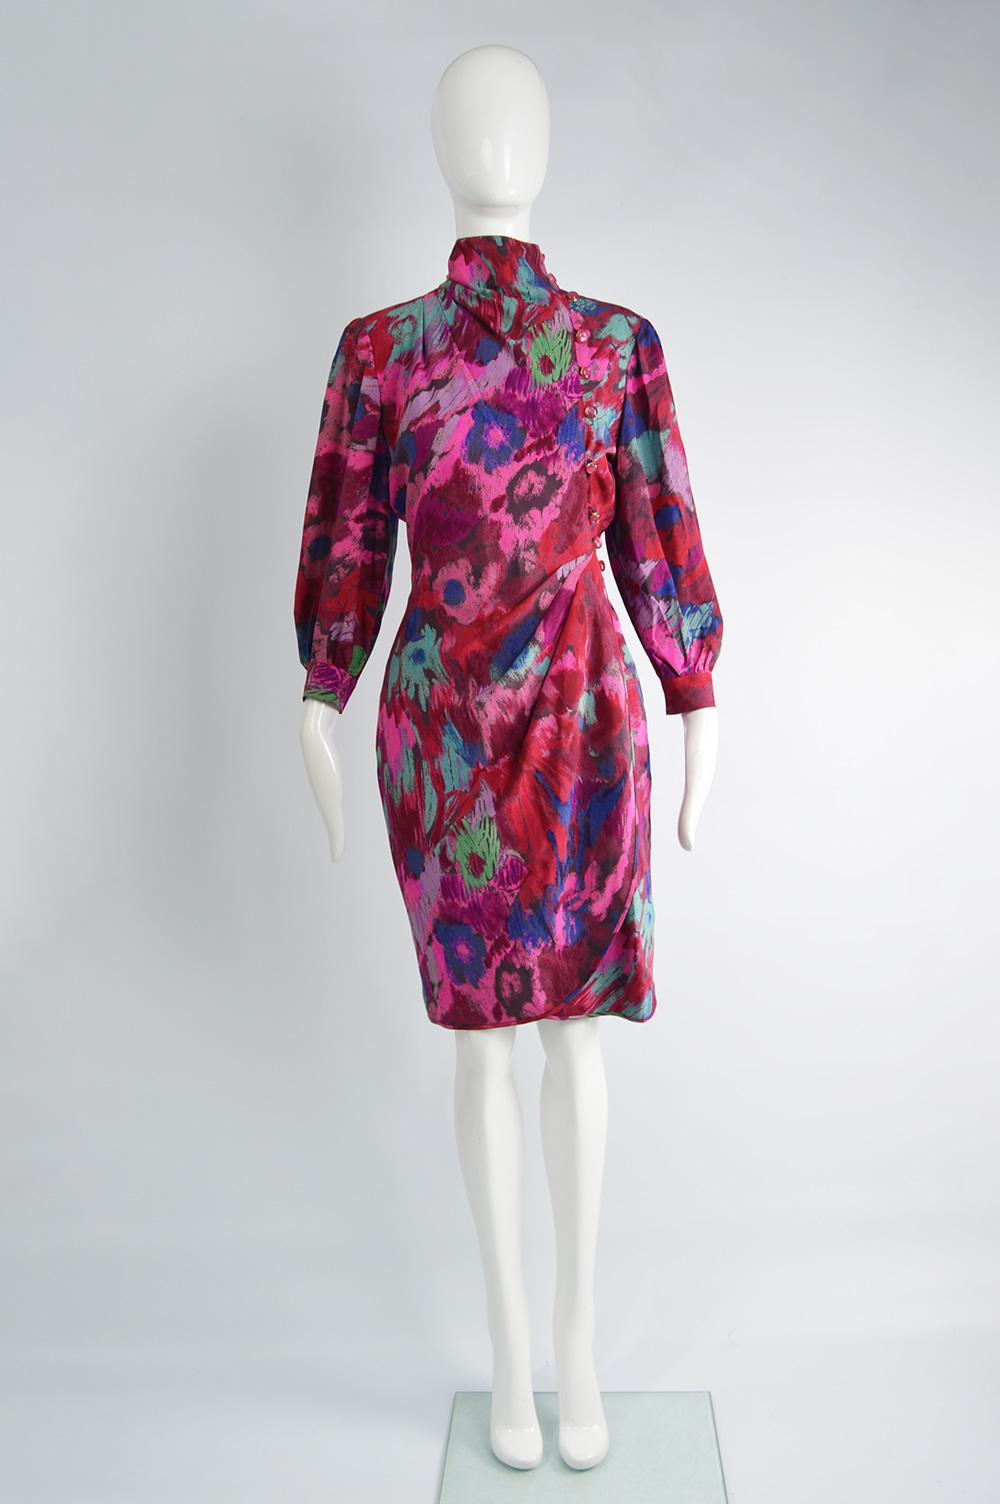 A beautiful vintage Emanuel Ungaro dress from the 80s in an abstract printed silk fabric with a high neck, draped details at the side and slightly cropped balloon sleeves. Perfect for a party or evening event. 

Size: Marked vintage UK 8 but this